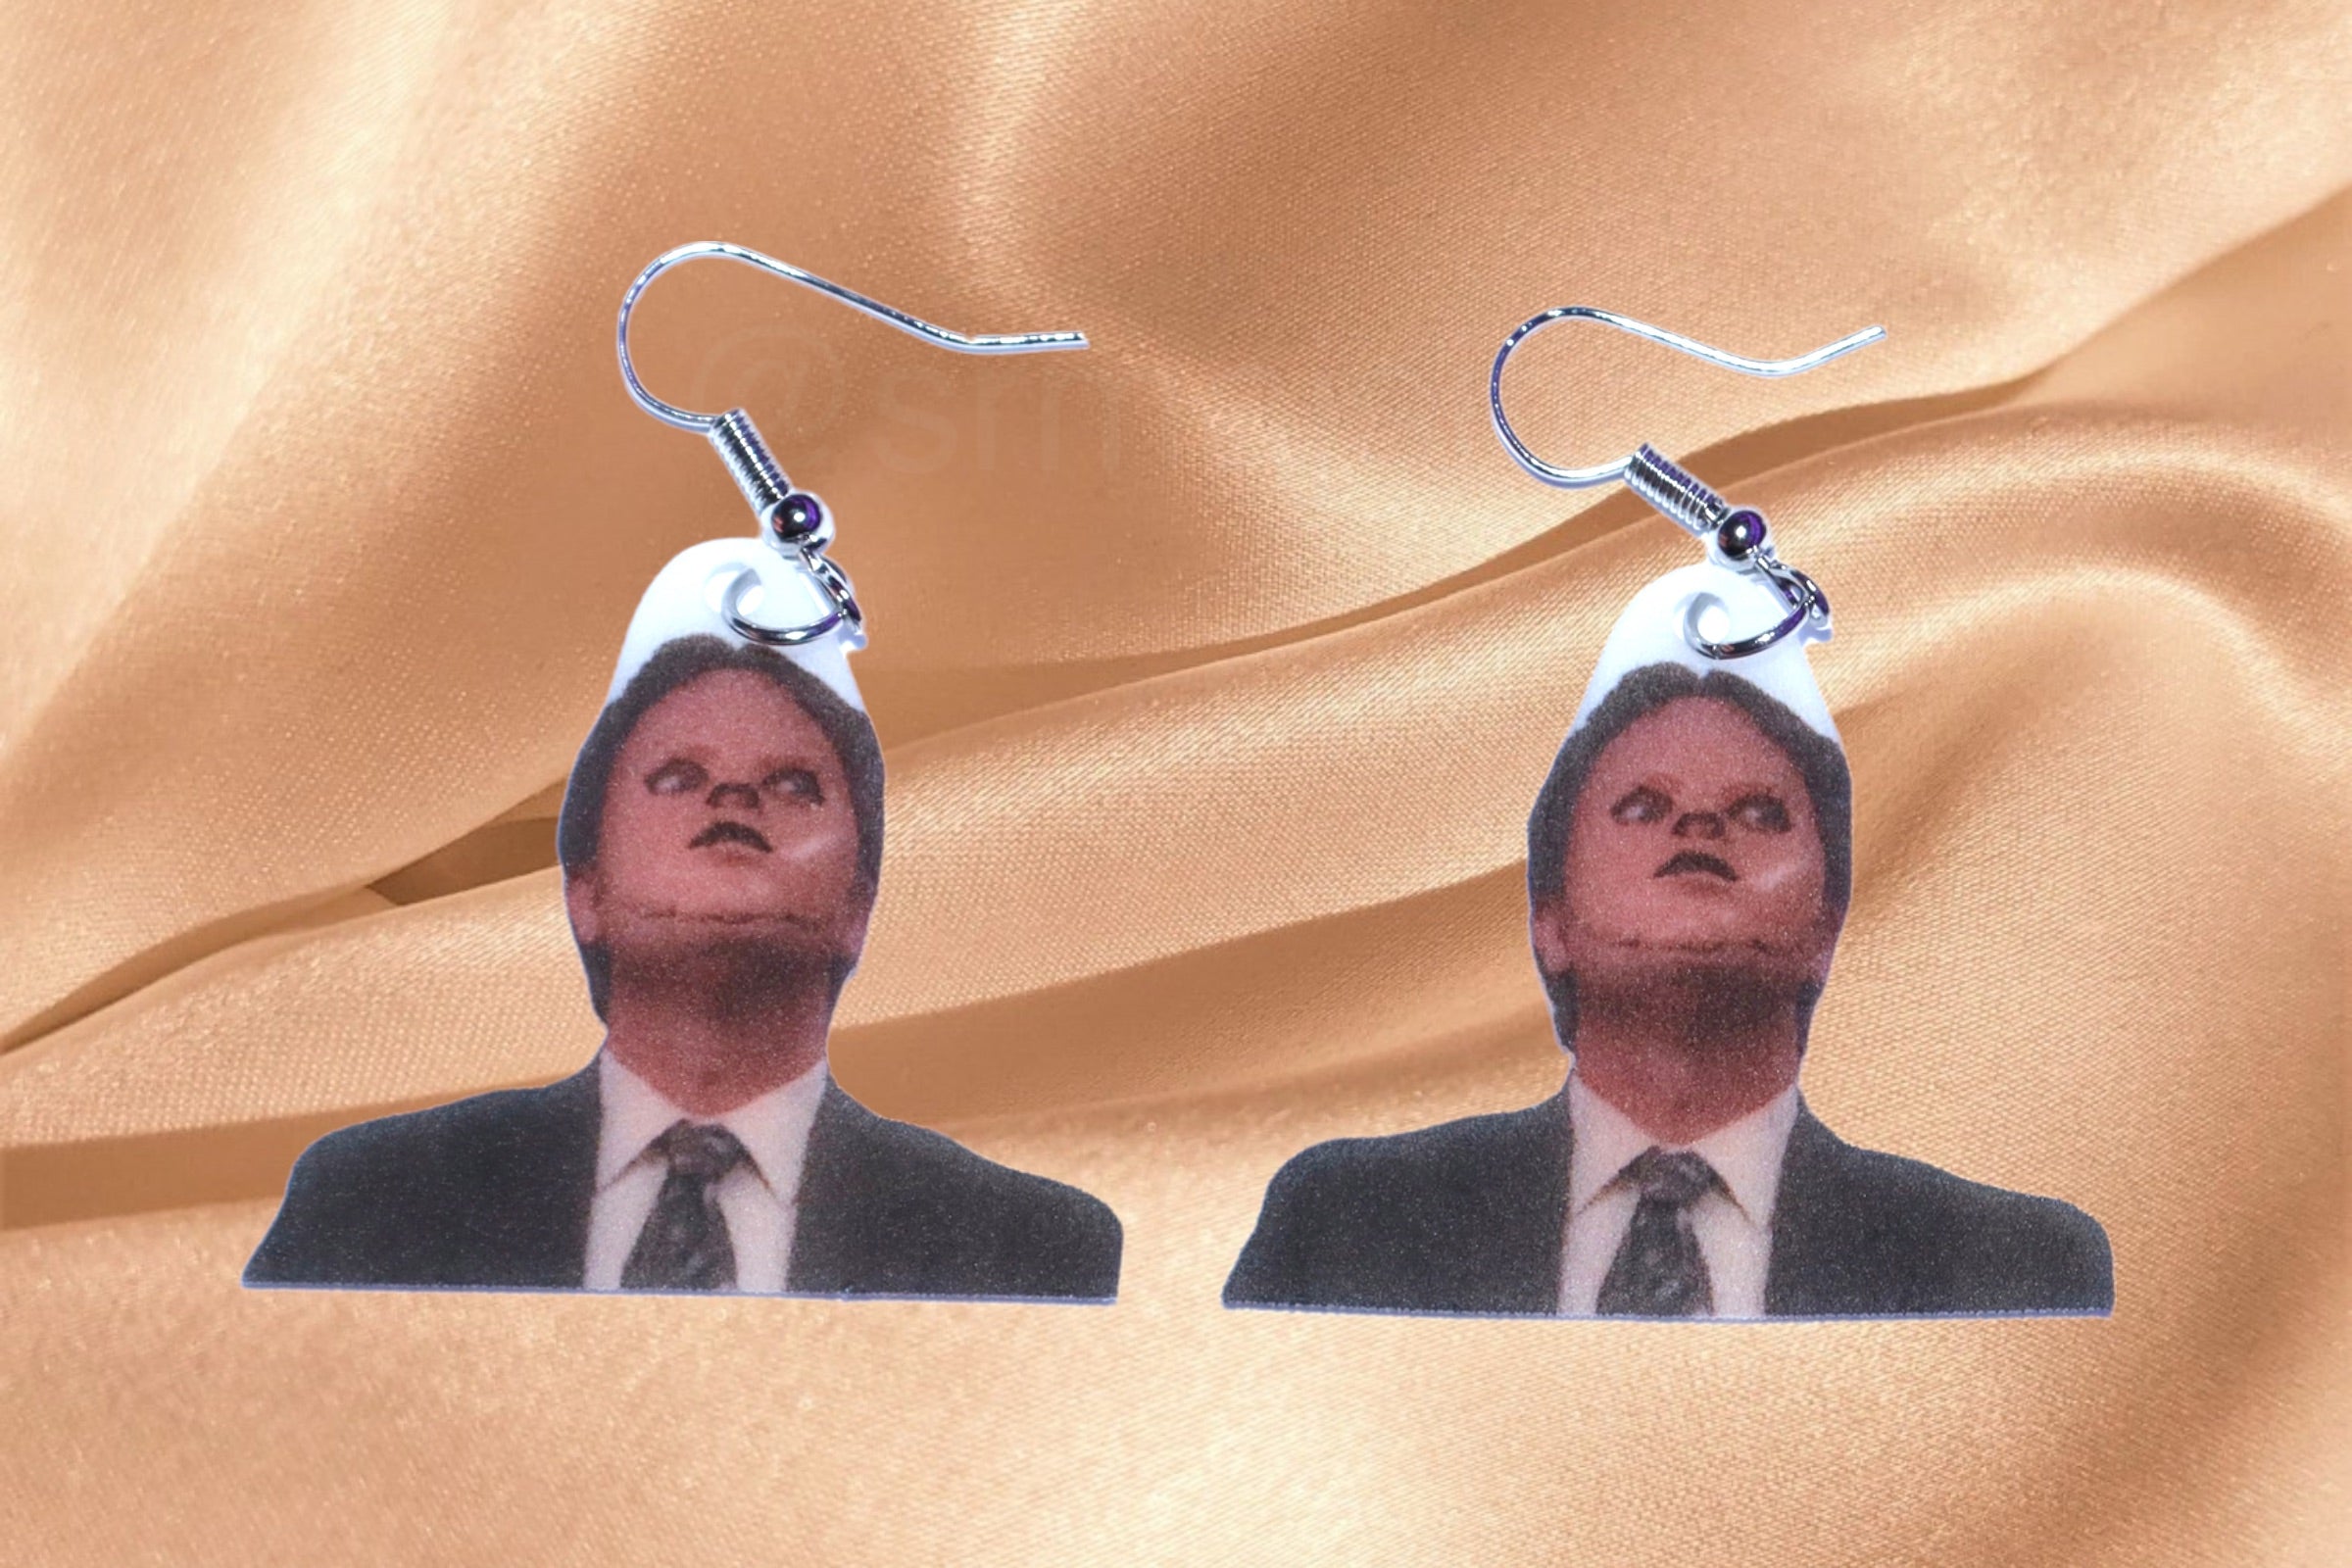 The Office Characters Funny Handmade Earrings!